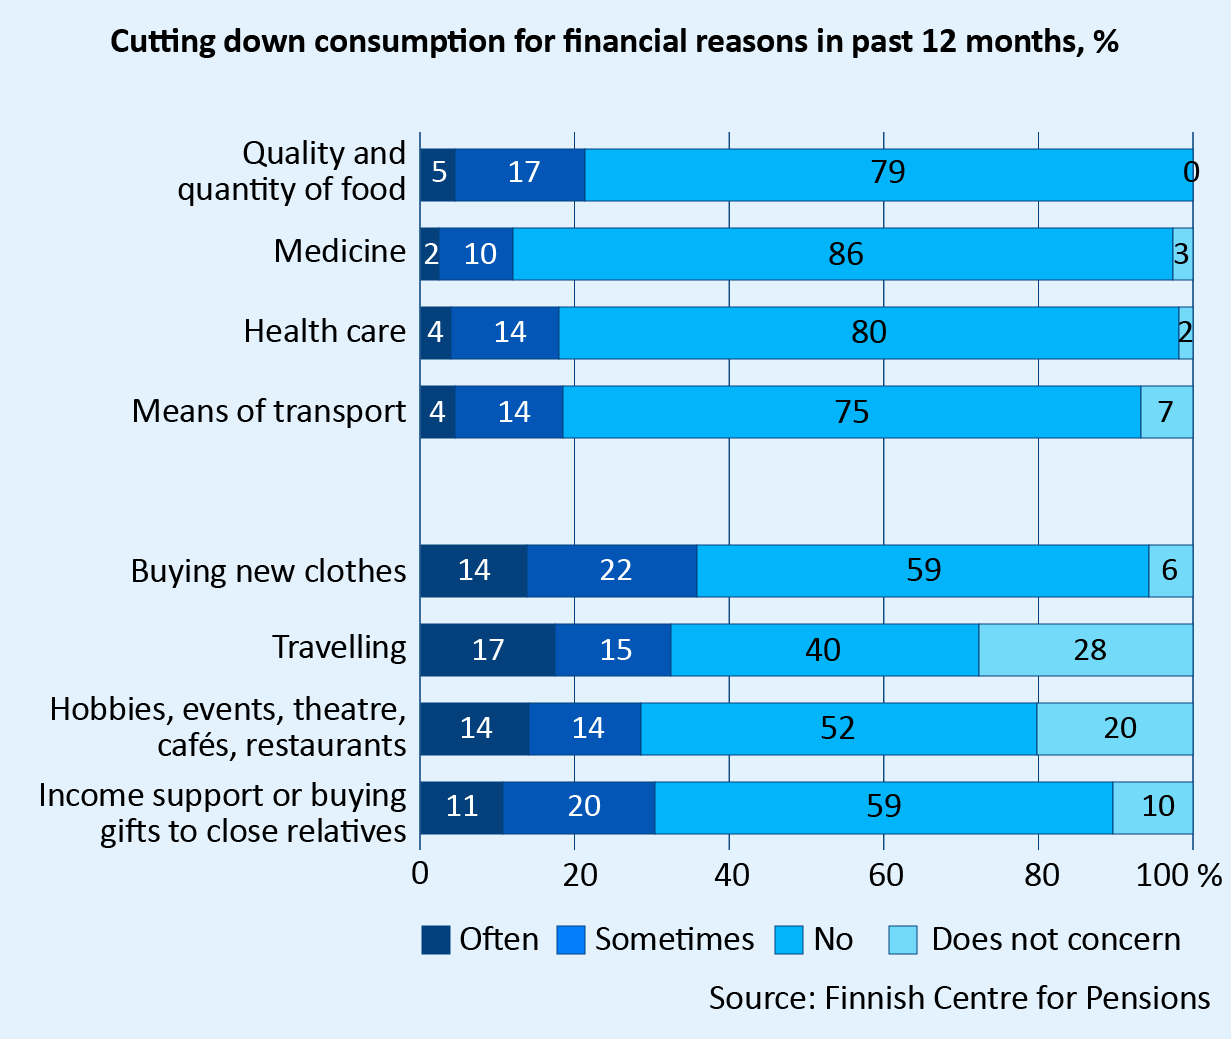 In 2020, around 28–36% of the respondents were forced to often or sometimes cut down on leisure-time consumption or buying new clothes. Around 12% had often or sometimes cut down on buying medication, and 22% had reduced the quality or quantity of food they buy. Source: Finnish Centre for Pensions.